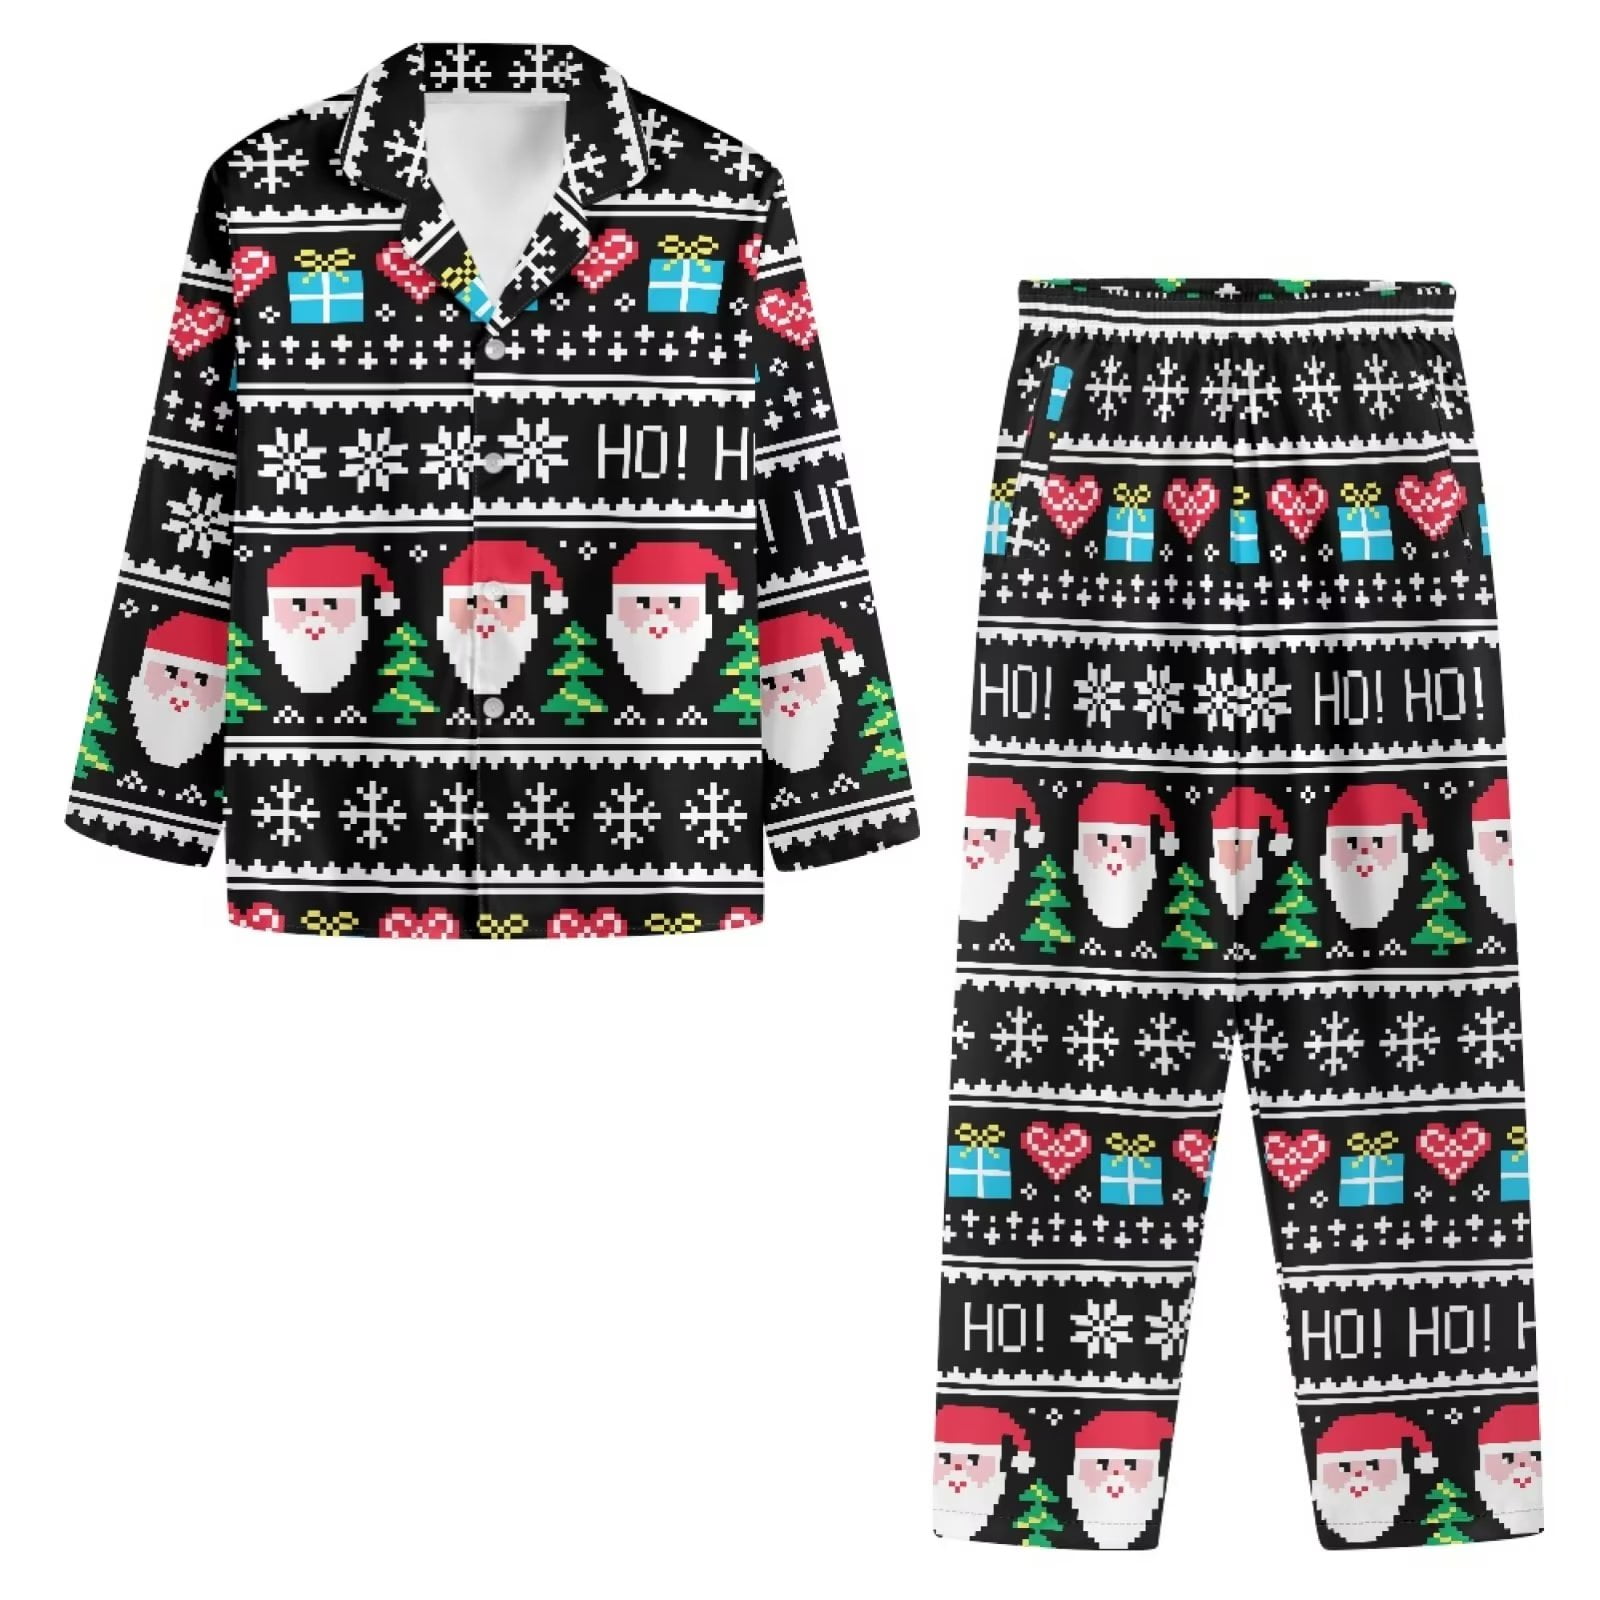  Matching Family Pajamas Sets Christmas,ladies tee shirts  clearance loose fit,ladies clothing sale,teacher deals prime,clearance  wedding sweatshirt,prime deals of the day clearance,things for 2 dollars:  Clothing, Shoes & Jewelry